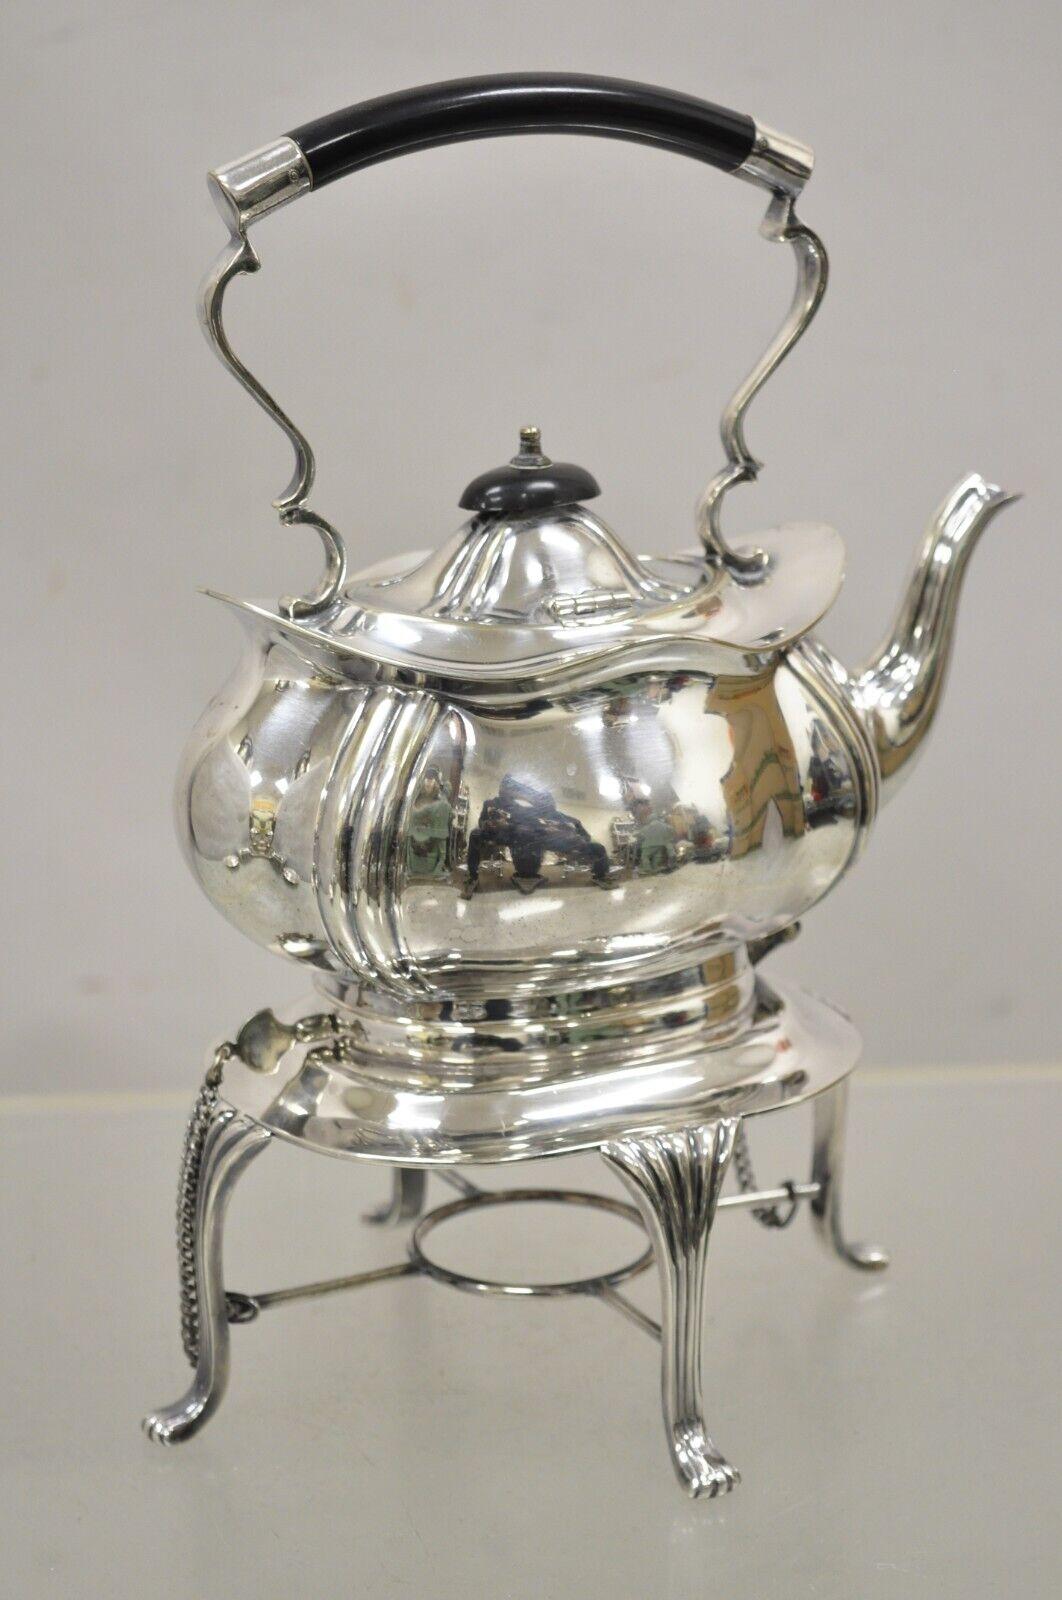 Antique Buckingshire Sheffield England Silver Plated Victorian Tip Kettle and Stand. Item features a unique tipping design with 